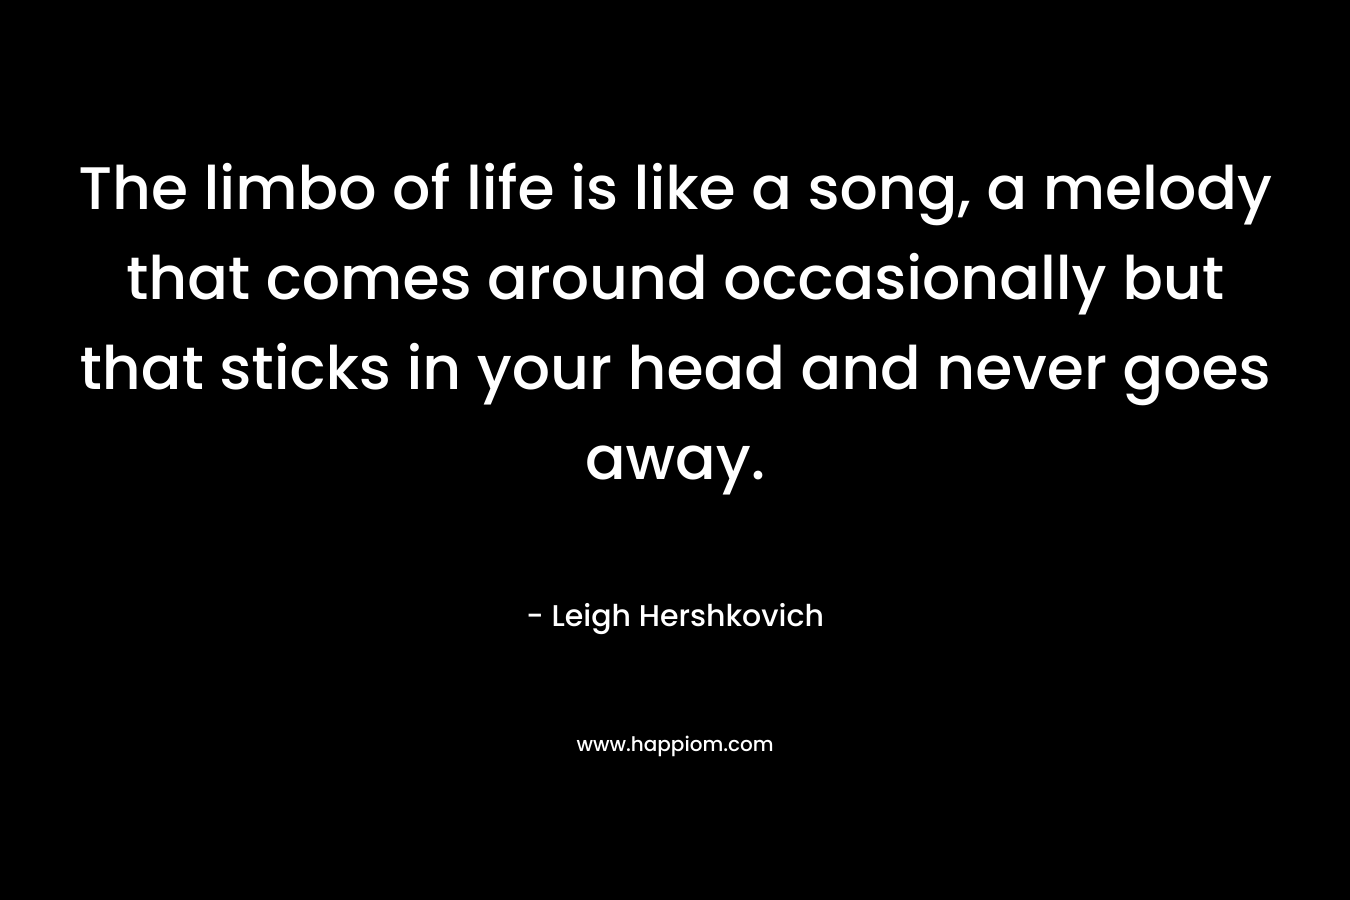 The limbo of life is like a song, a melody that comes around occasionally but that sticks in your head and never goes away. – Leigh Hershkovich